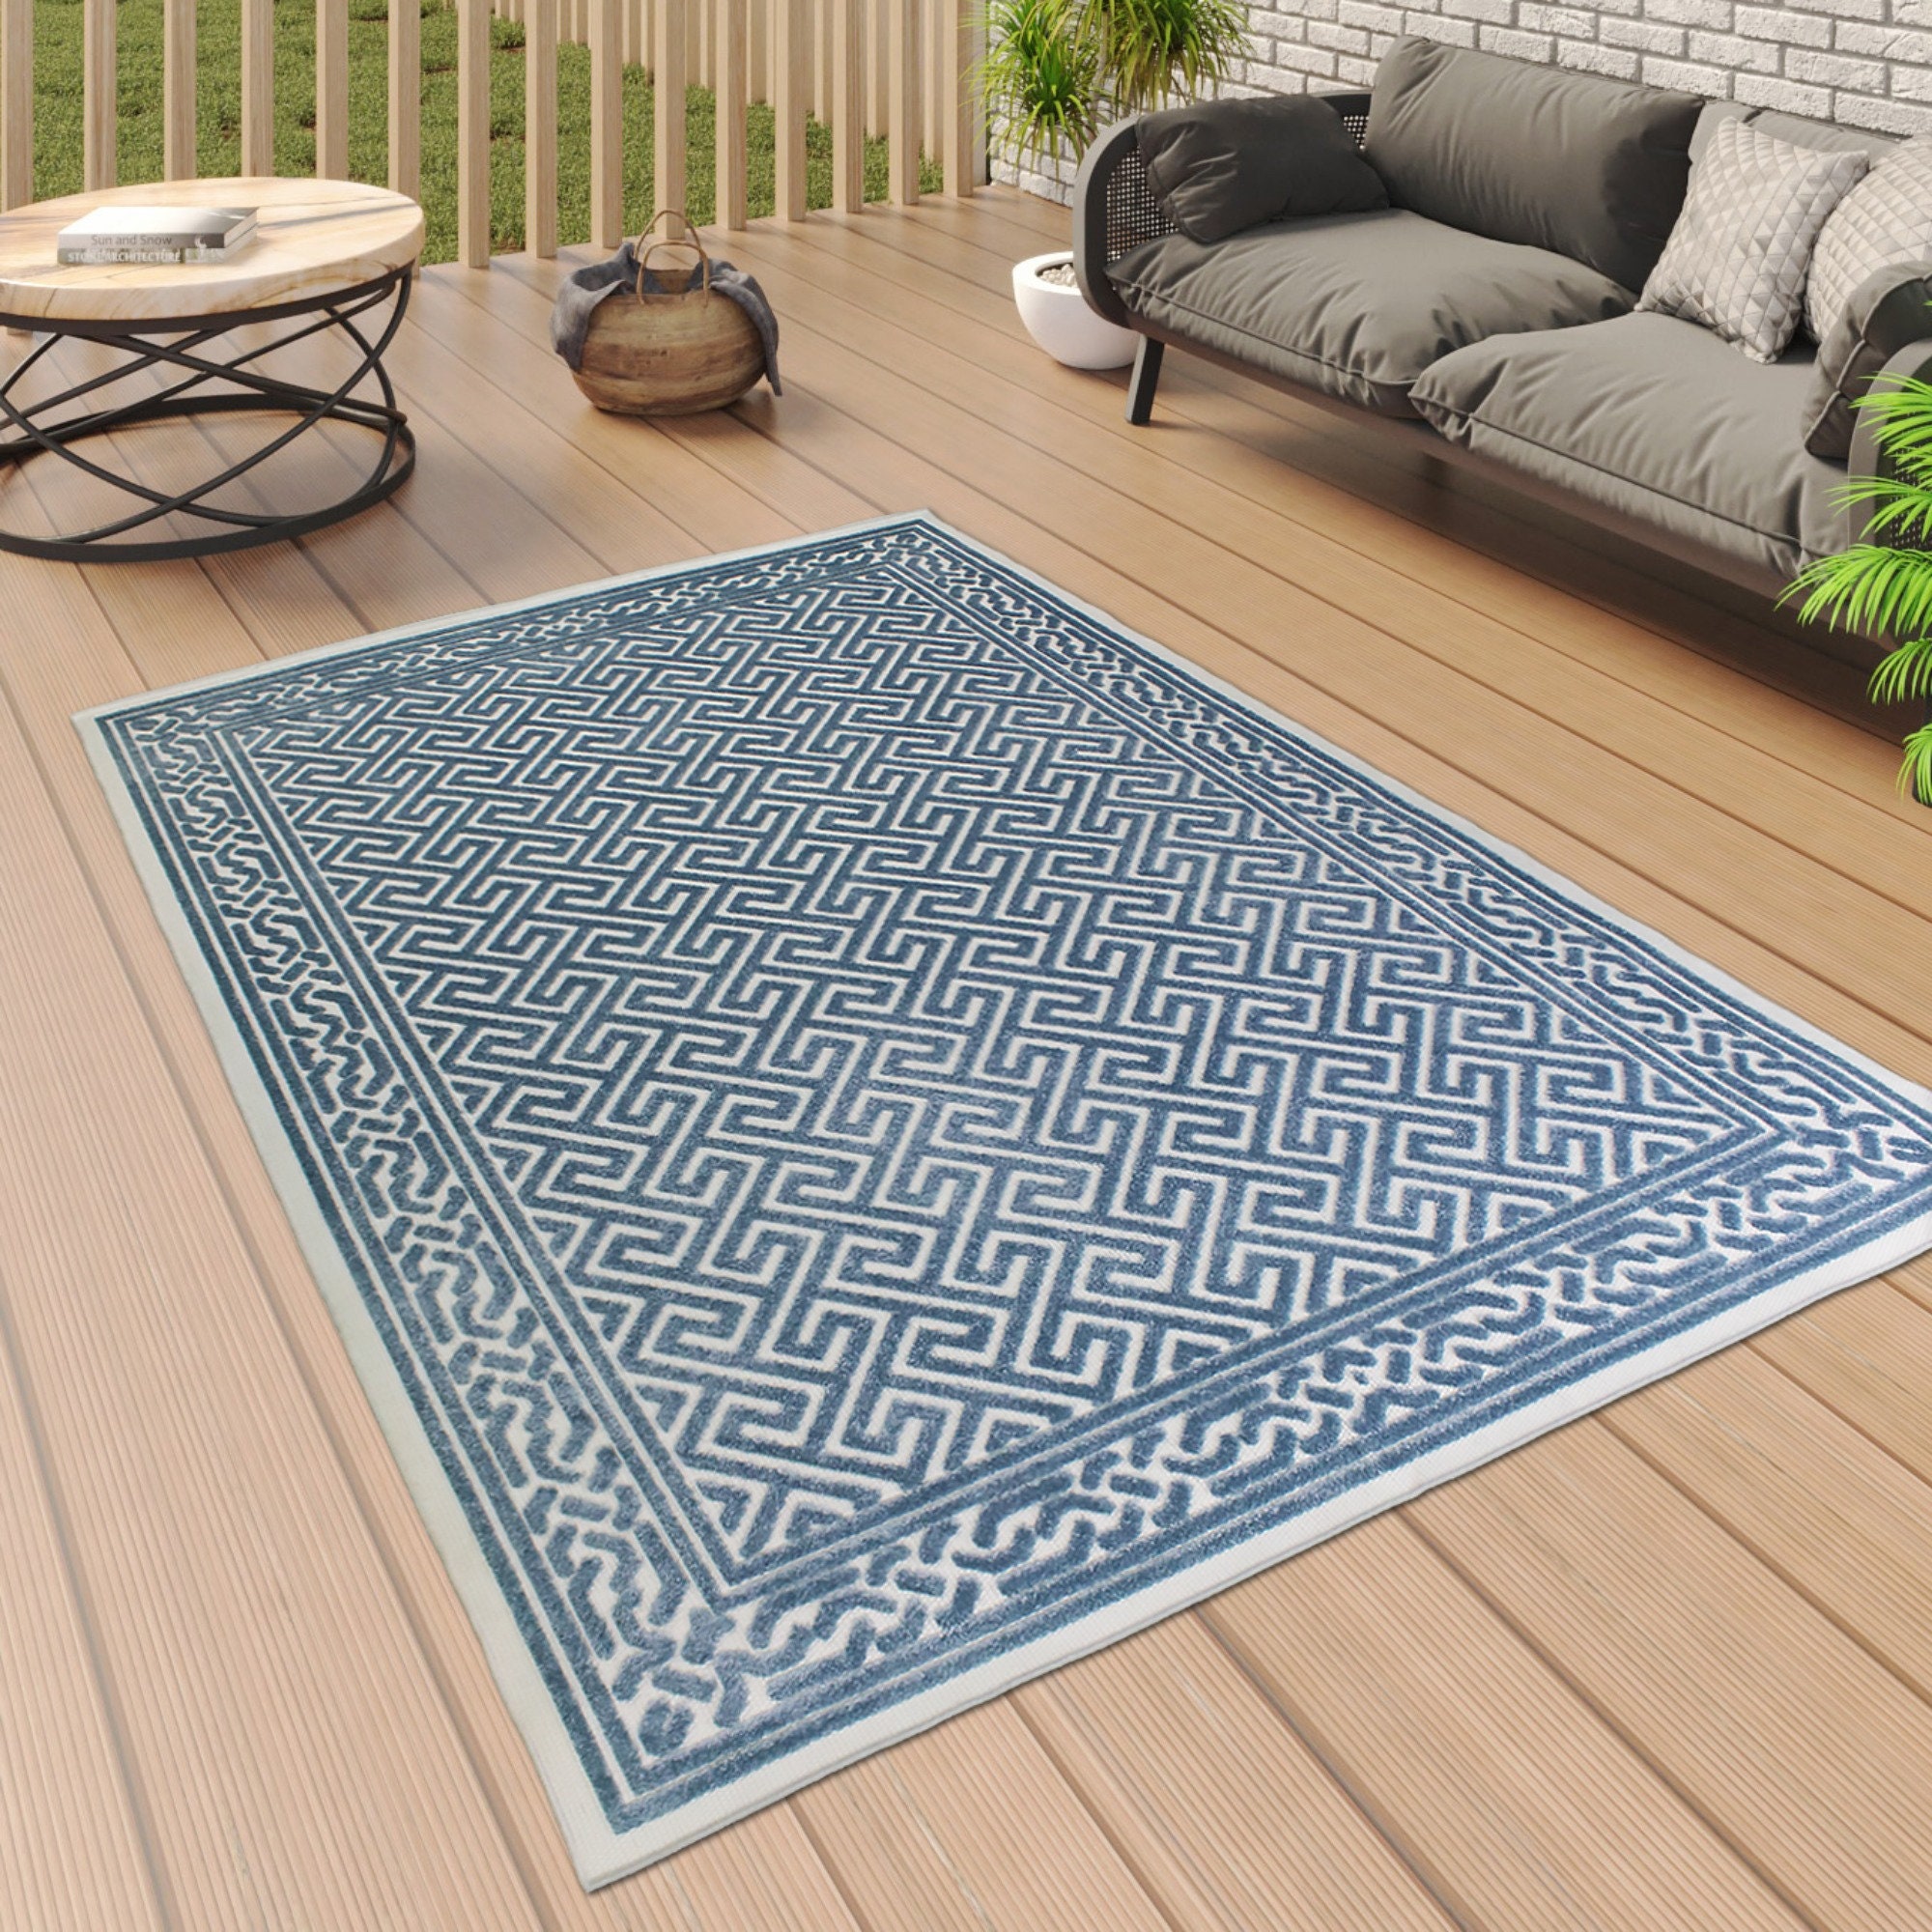 Outdoor Blue Rug Teal Indoor For, Teal And Cream Rug